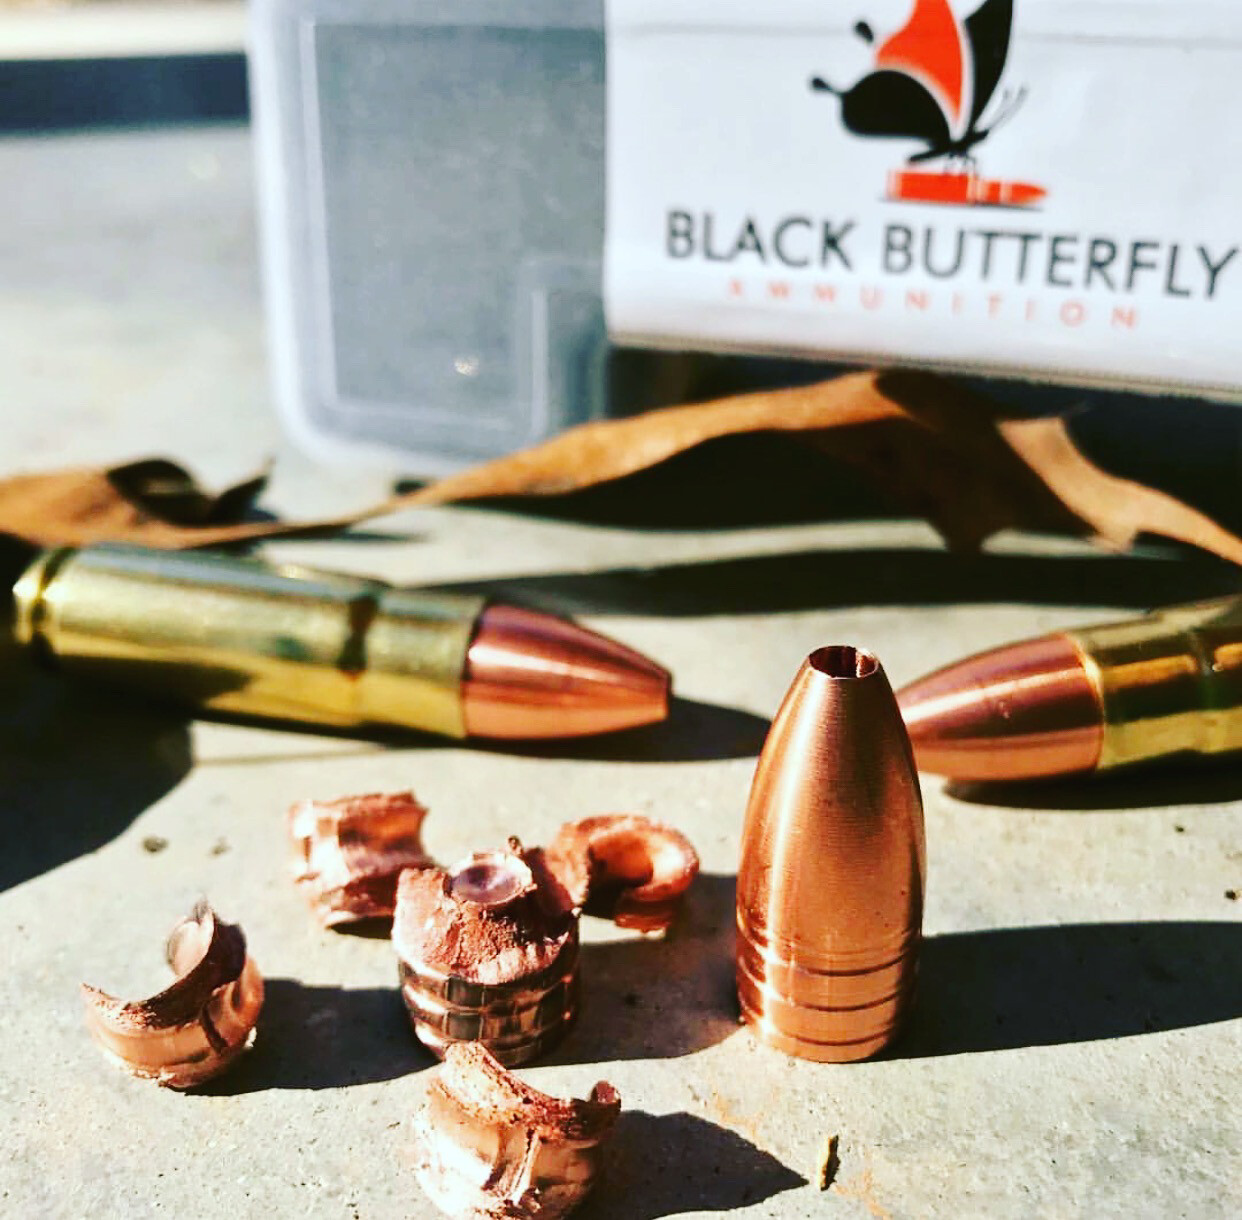 Black Butterfly Ammunition Premium, .458 SOCOM, 260 gr, 5 Rounds, Cutting Edge MAXIMUS FRACTURA High Velocity Fracturing (SAMPLE PACK)